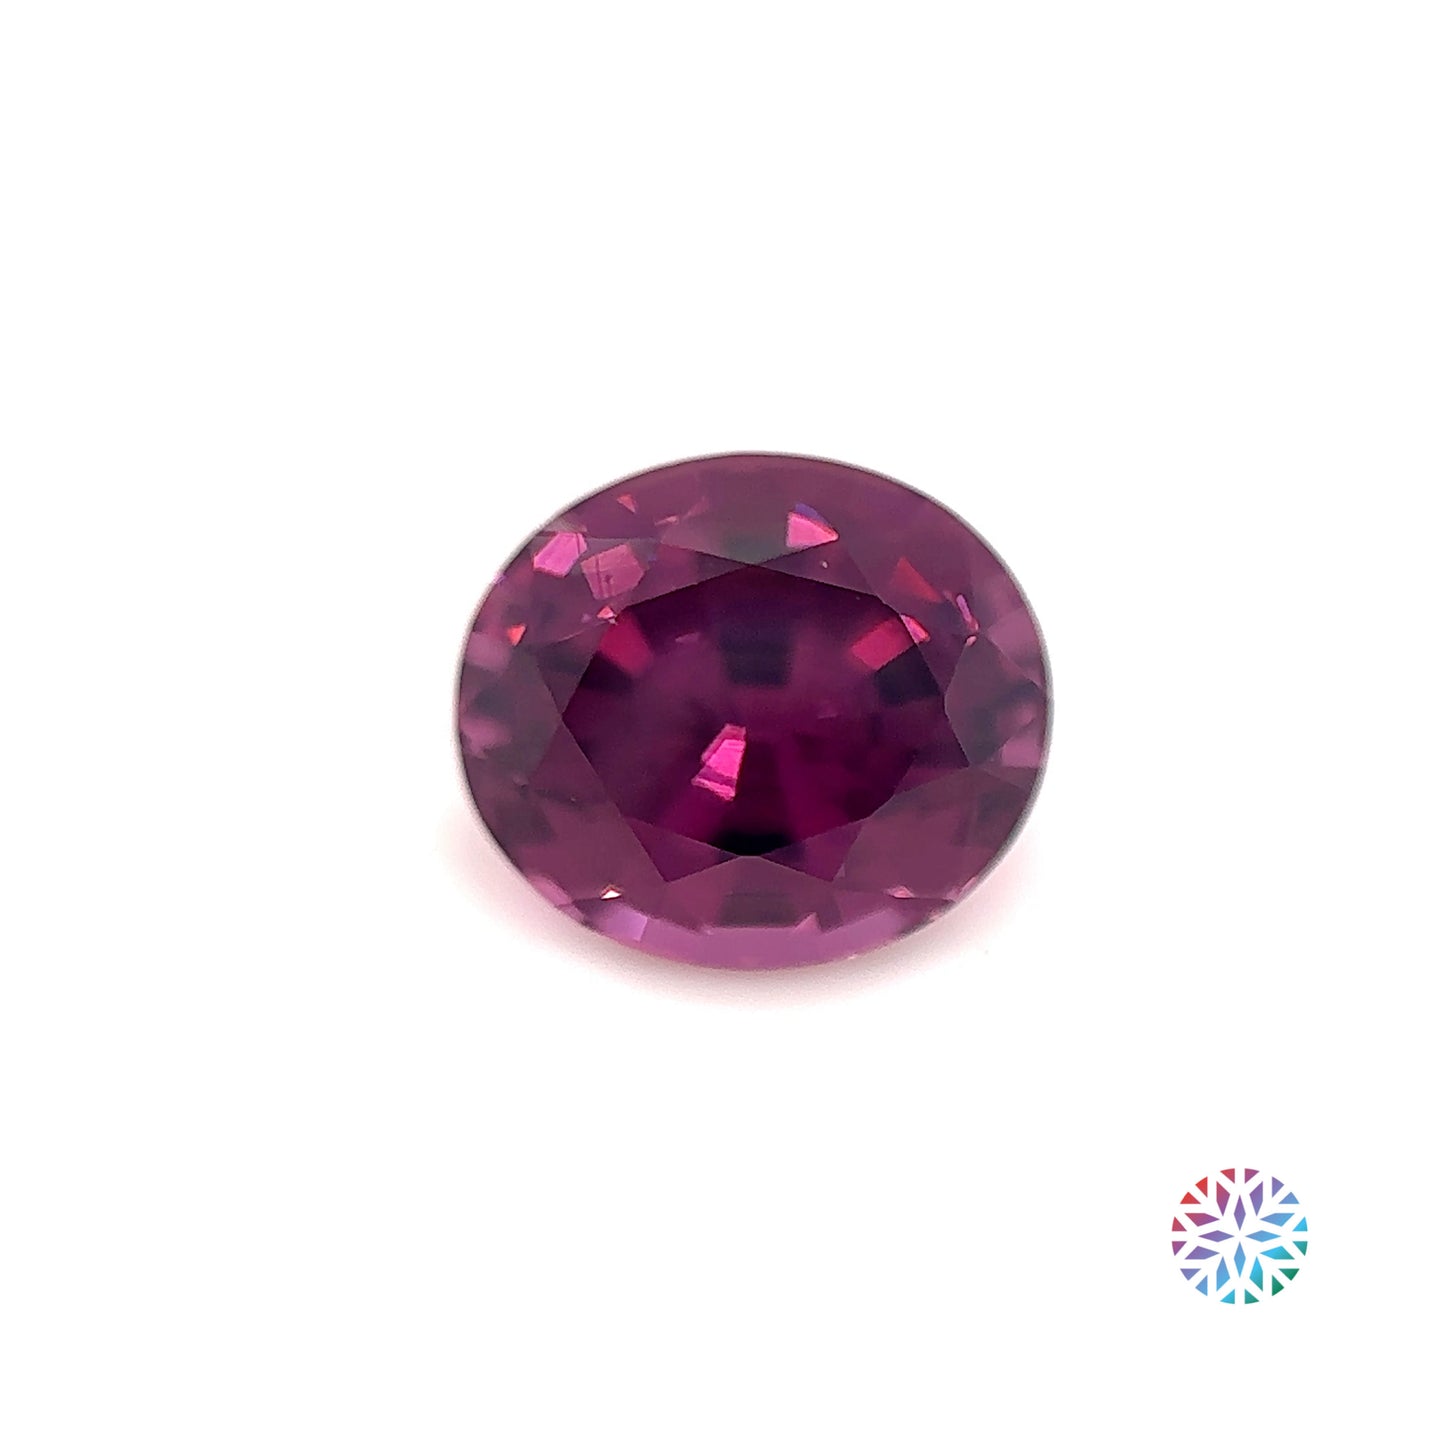 Pink Spinel- Oval, 3.51ct, 9.7 x 8.4 x 5.9mm